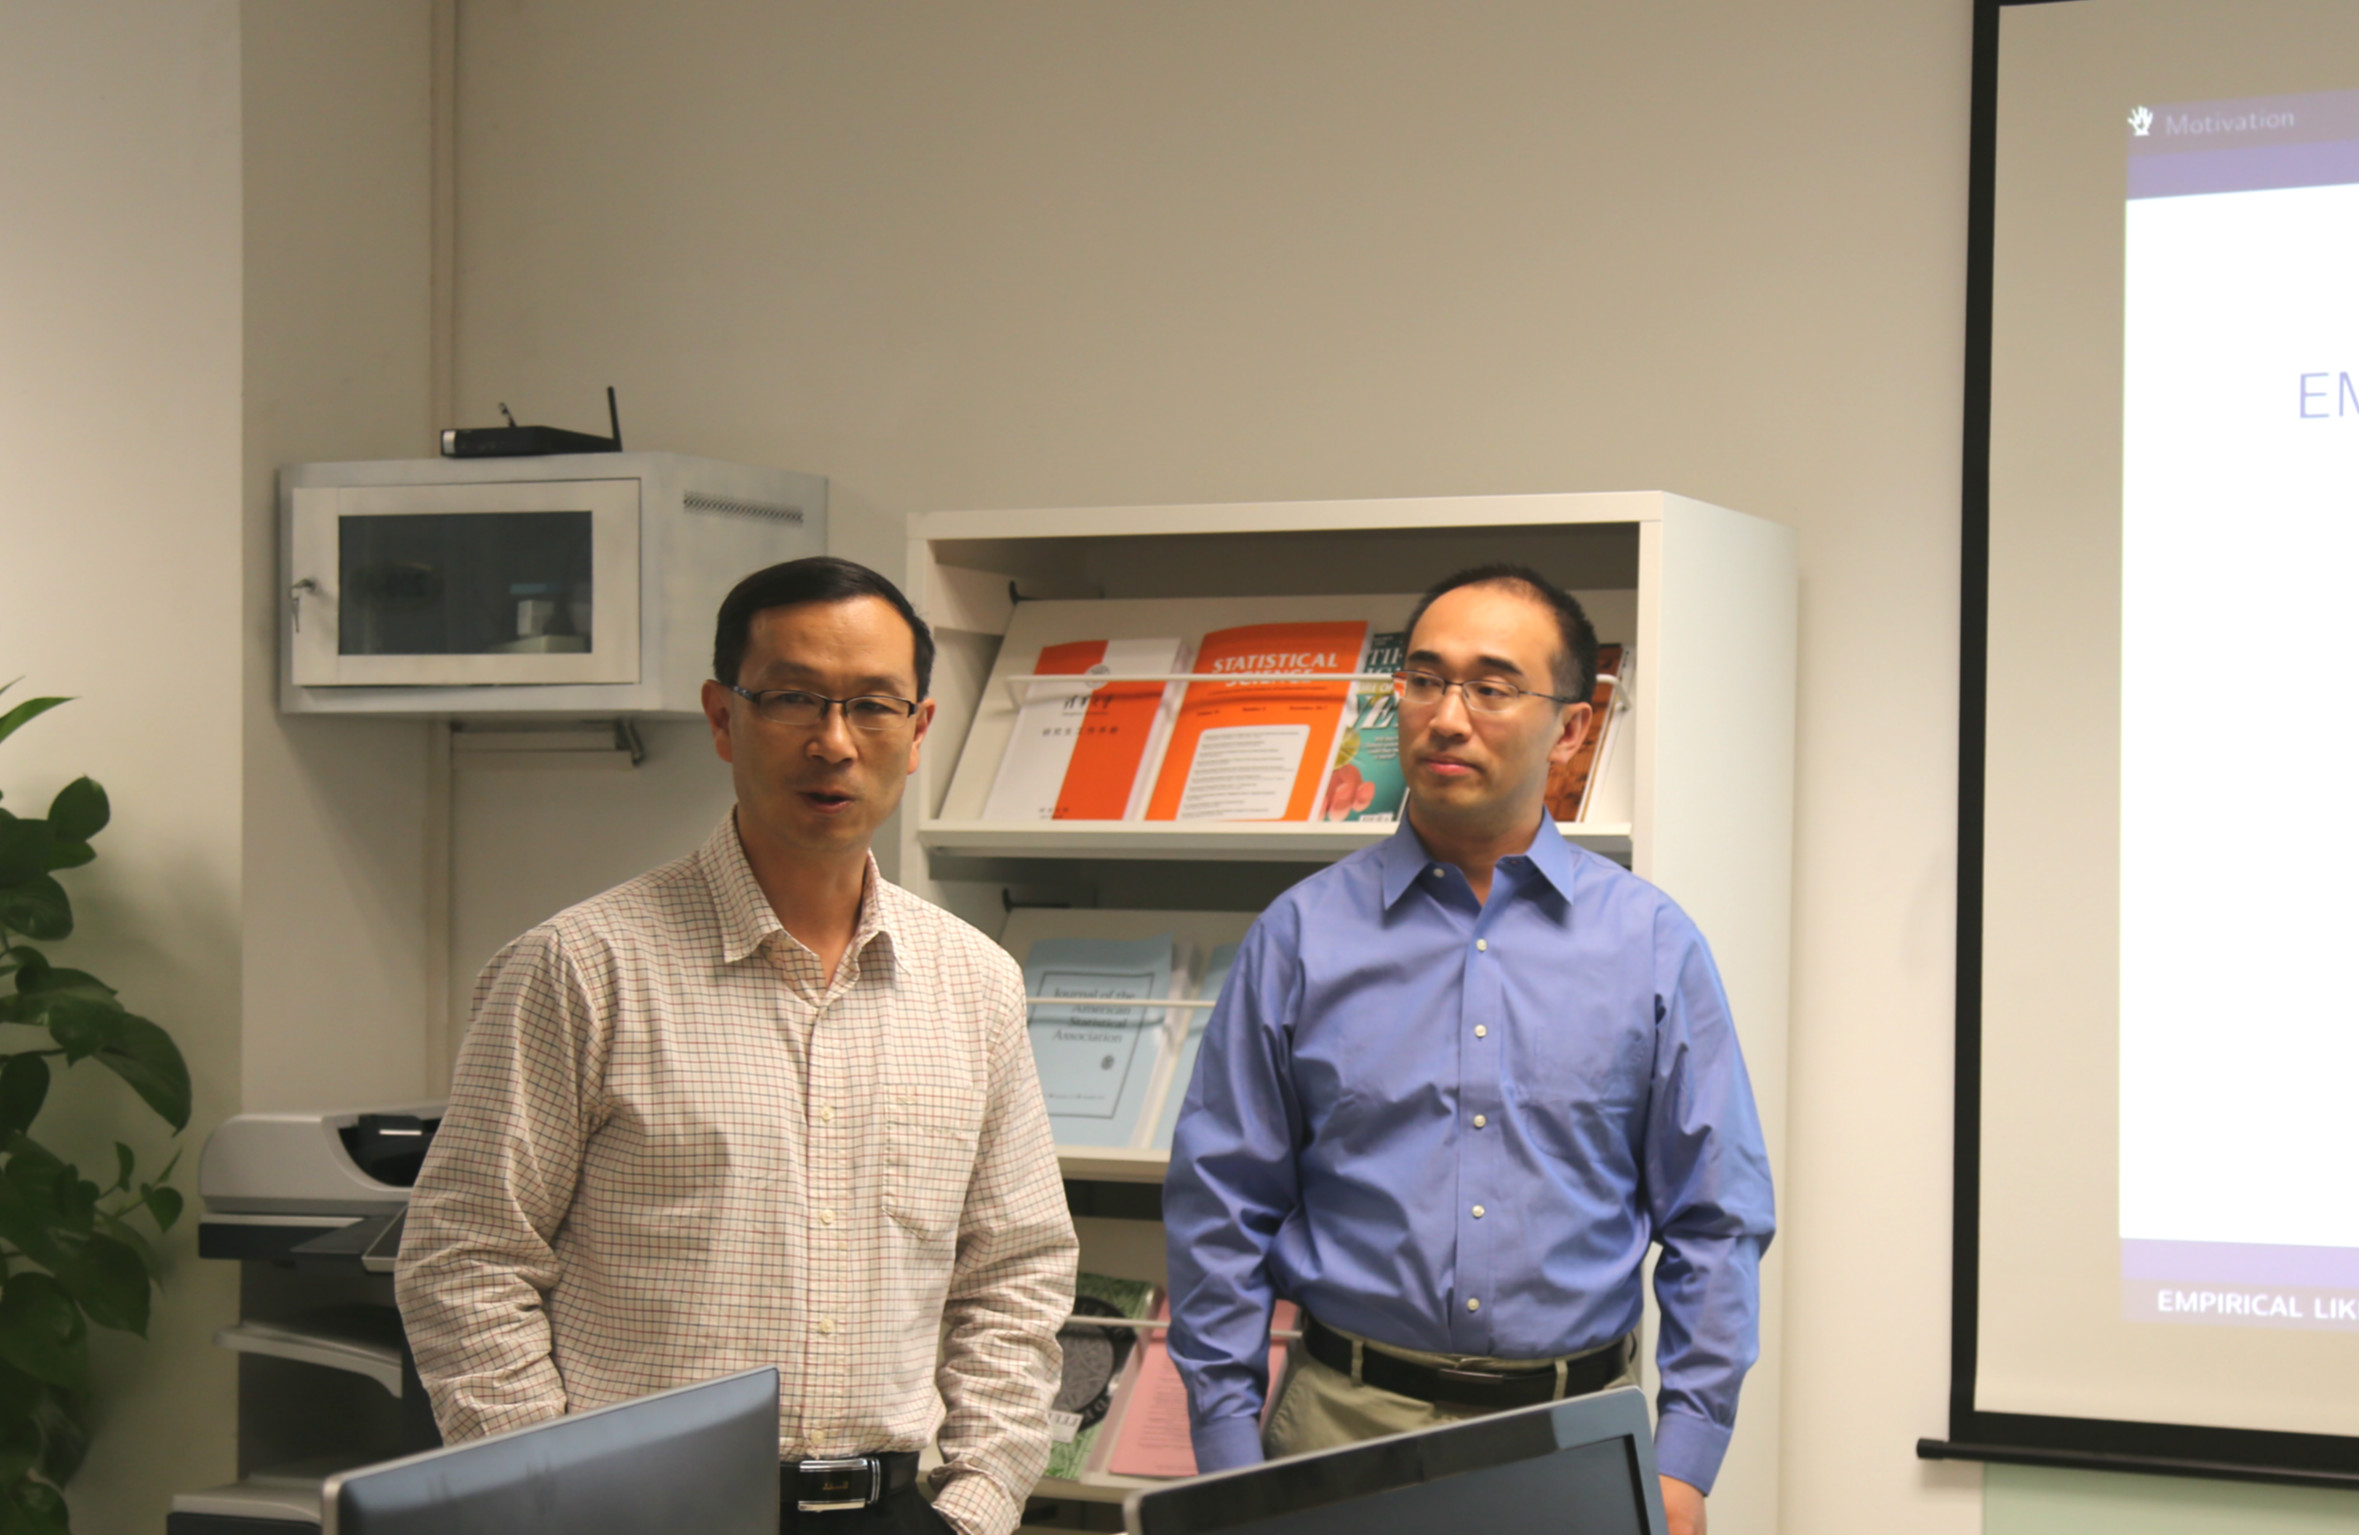 Prof. Rong Liu from University of Toledo Visits the Center and Gives a Talk